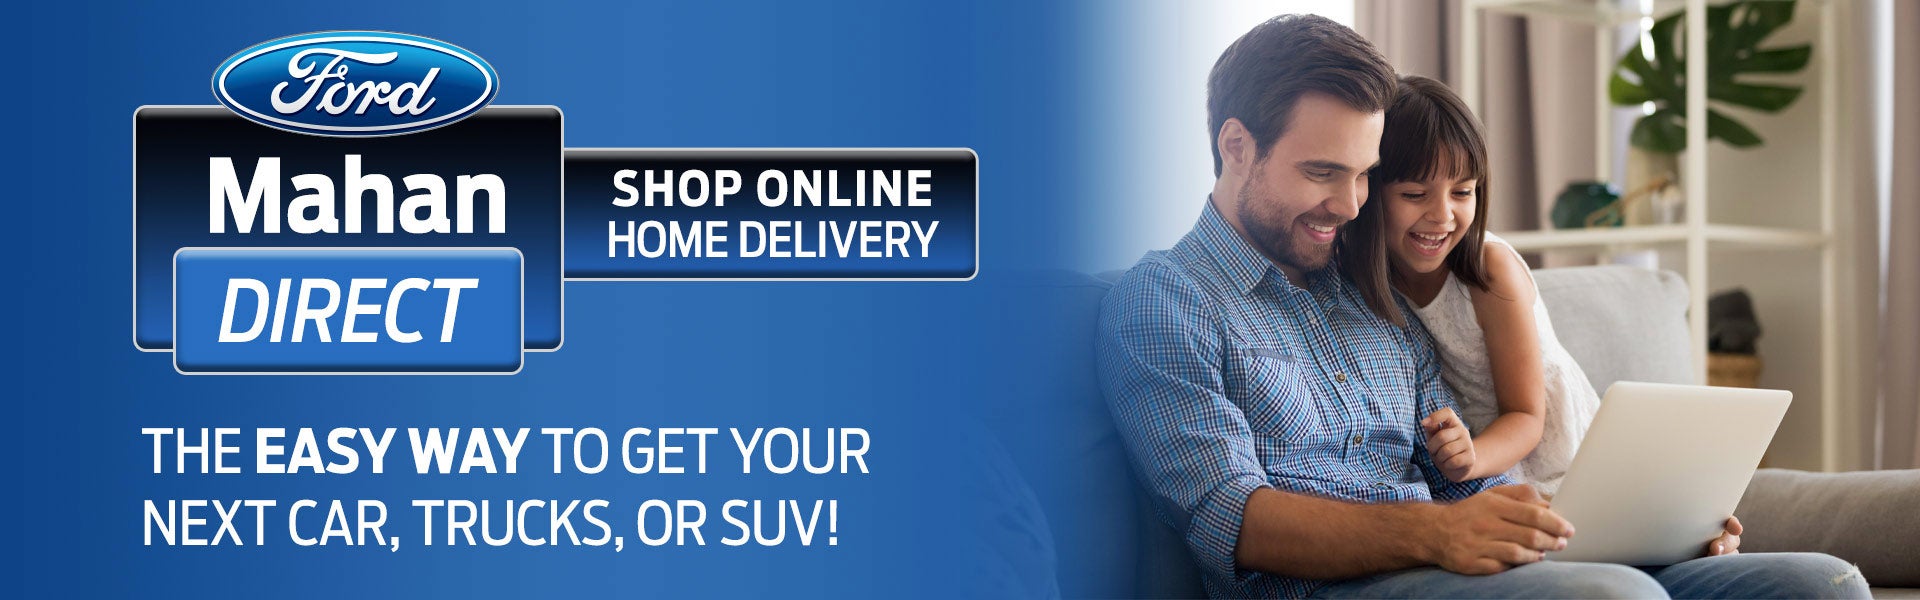 Shop Online, Home Delivery | Joe Mahan Ford Inc in Paris TN